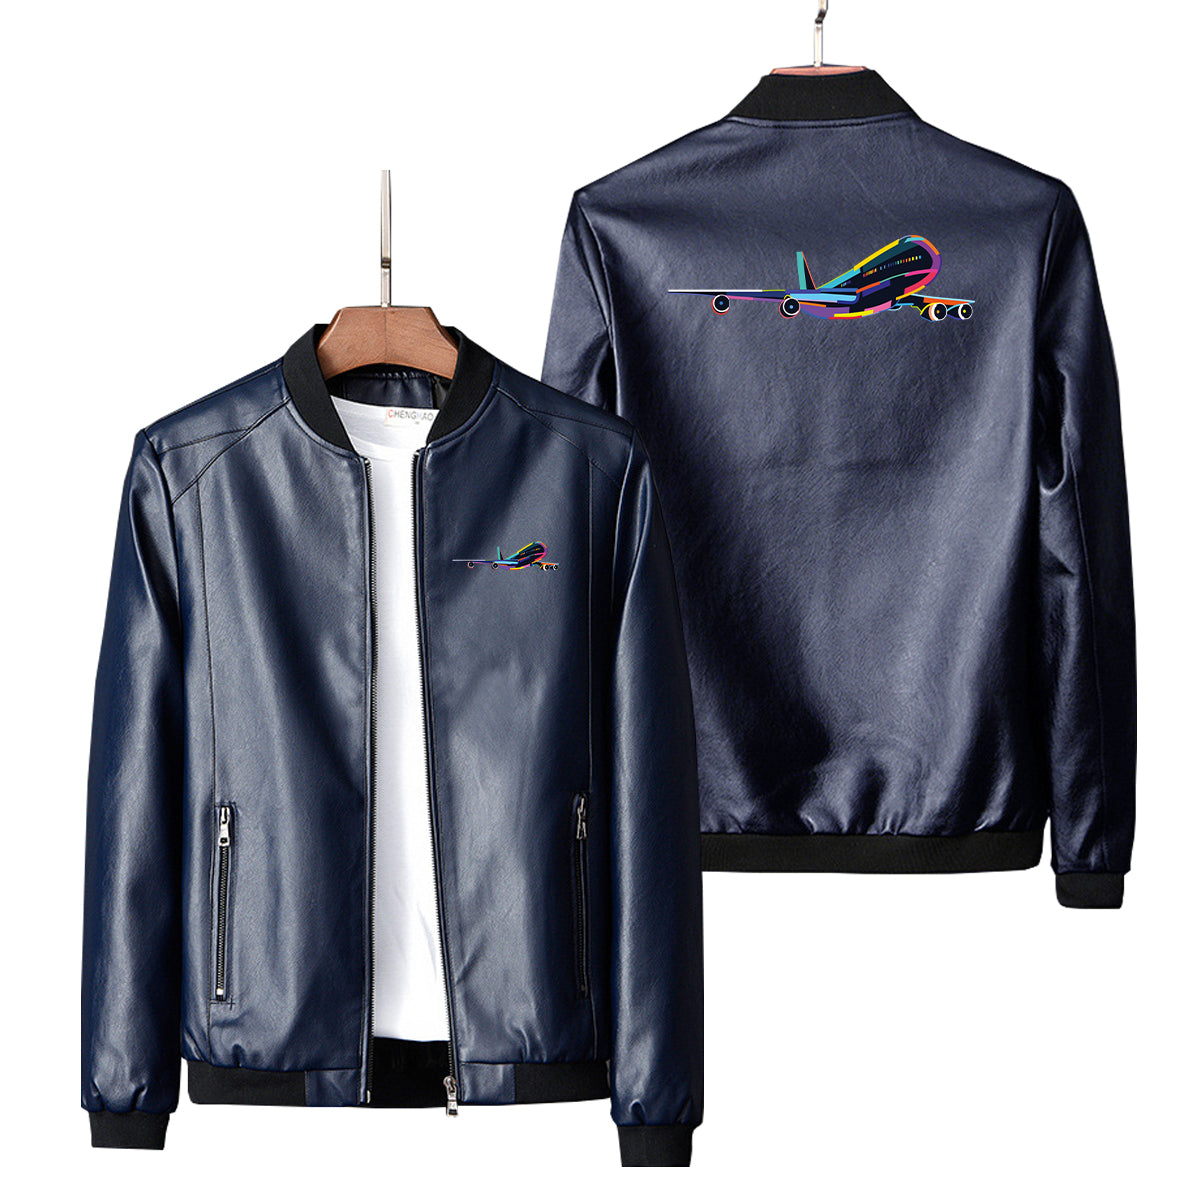 Multicolor Airplane Designed PU Leather Jackets